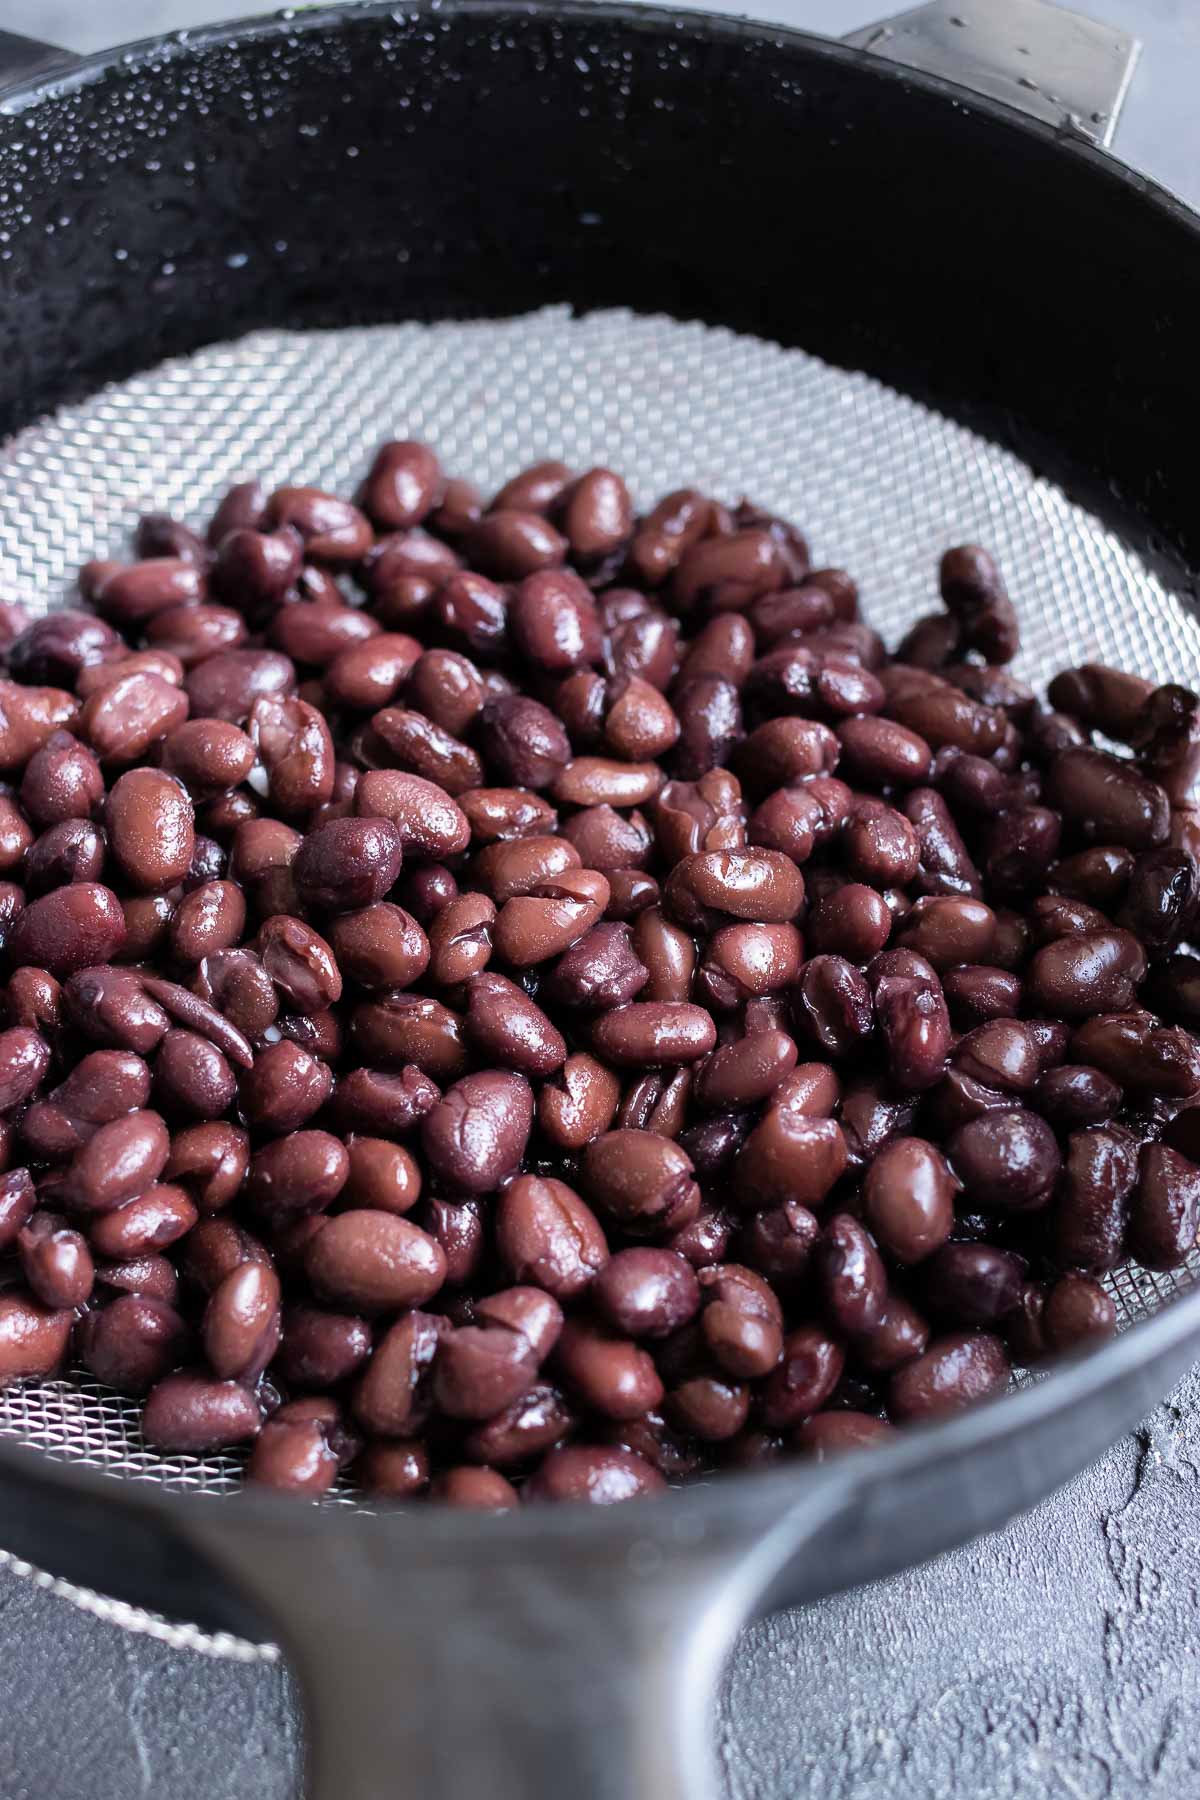 Rinsed and drained black beans for a Costa Rican beans and rice recipe.